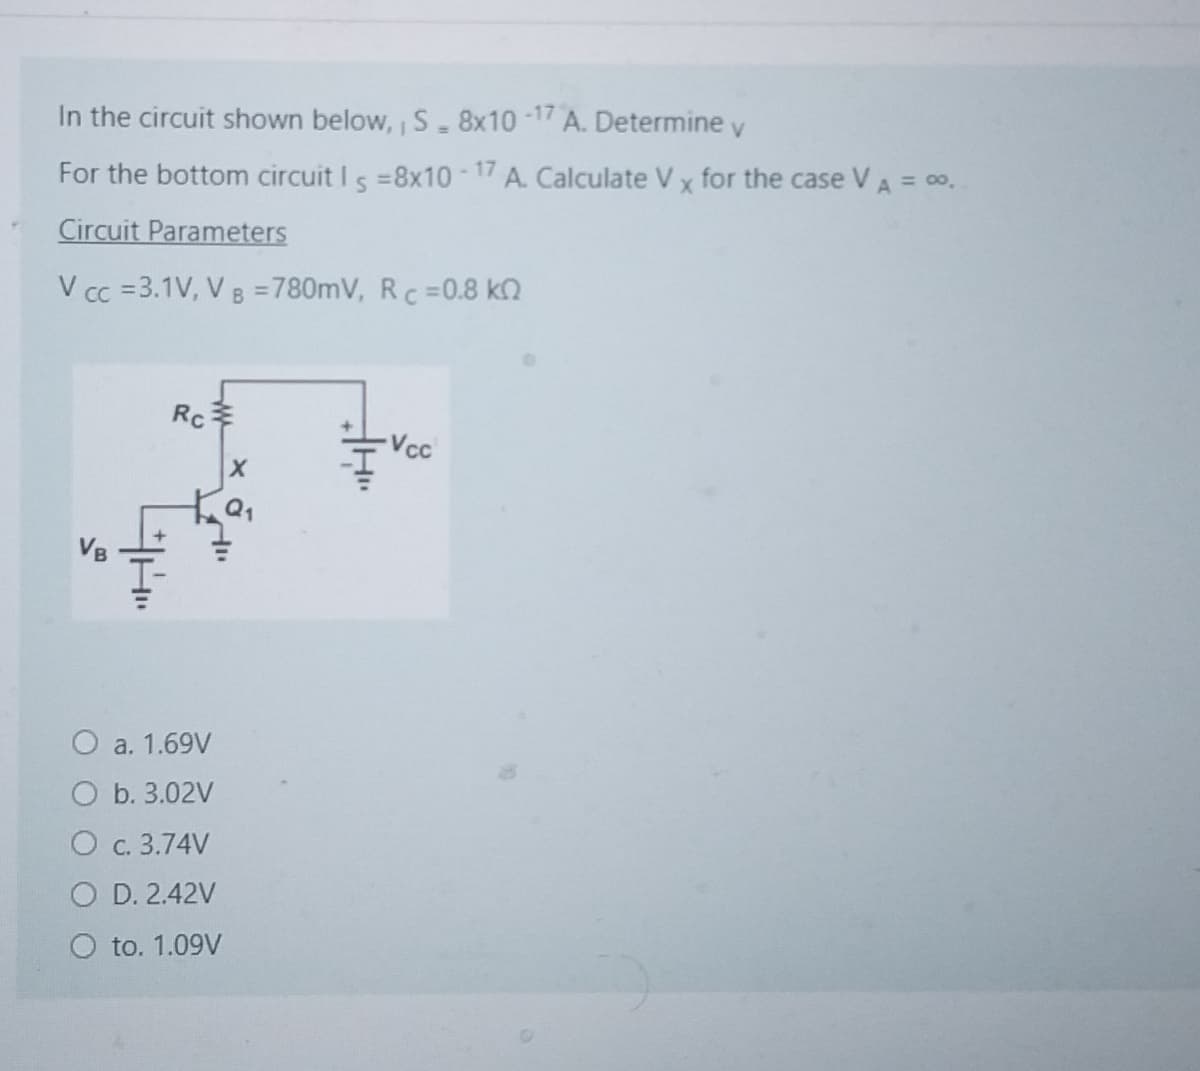 In the circuit shown below, S - 8x10-17 A. Determine v
For the bottom circuit Is=8x10-17 A. Calculate V x for the case VA = 0.
Circuit Parameters
V cc =3.1V, VB =780mV, Rc =0.8 kQ
VB
Rc
X
O a. 1.69V
O b. 3.02V
O c. 3.74V
O D. 2.42V
to. 1.09V
Vcc